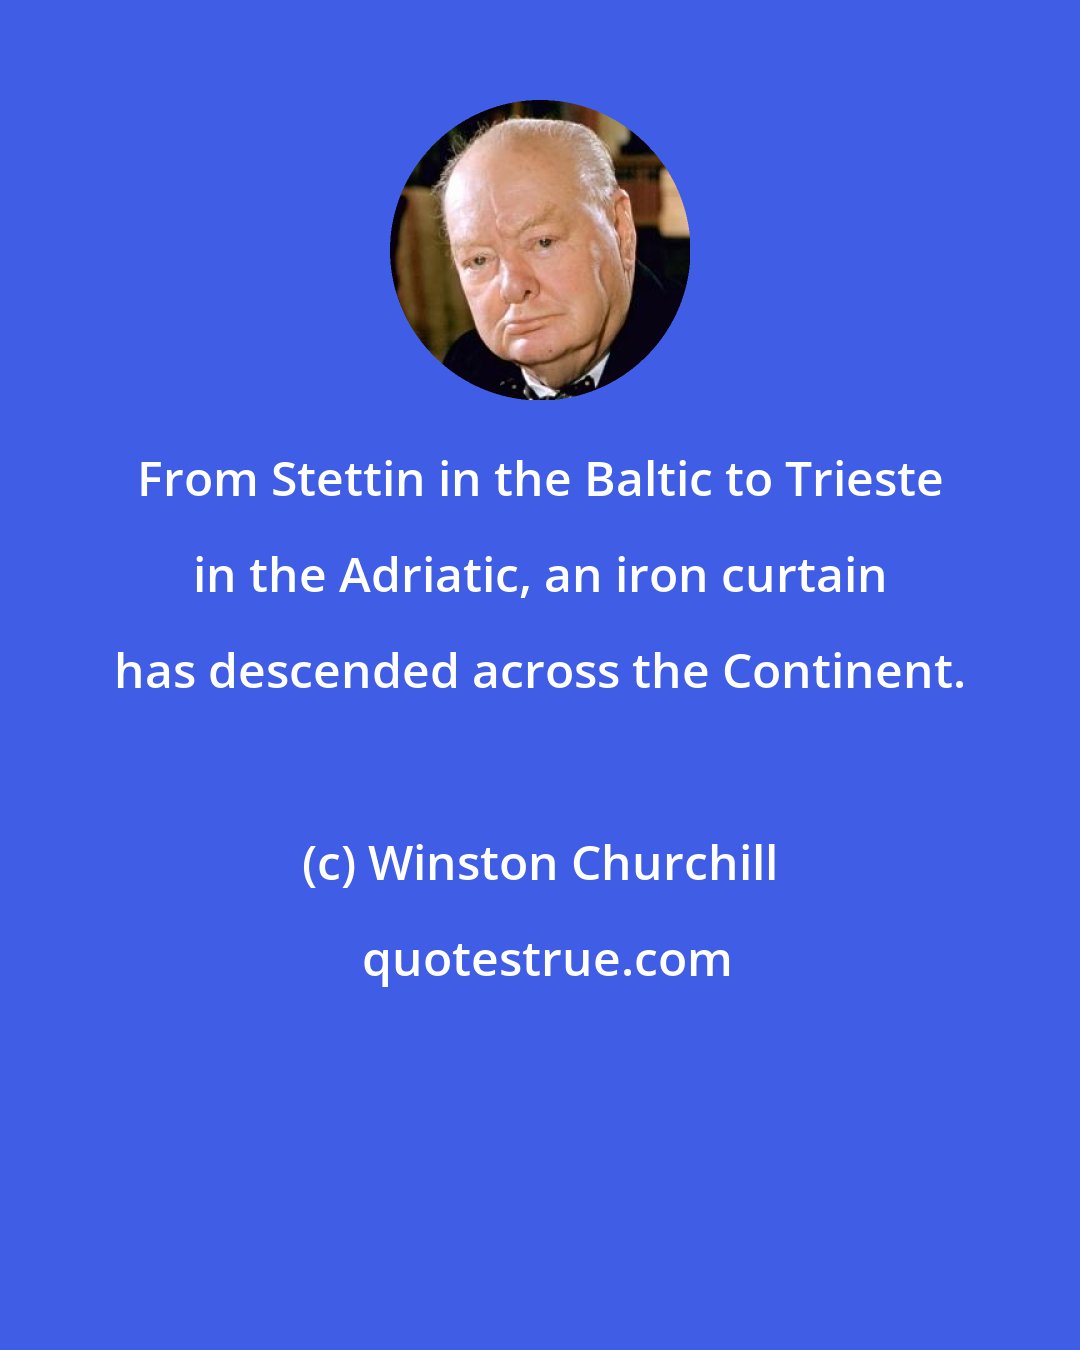 Winston Churchill: From Stettin in the Baltic to Trieste in the Adriatic, an iron curtain has descended across the Continent.